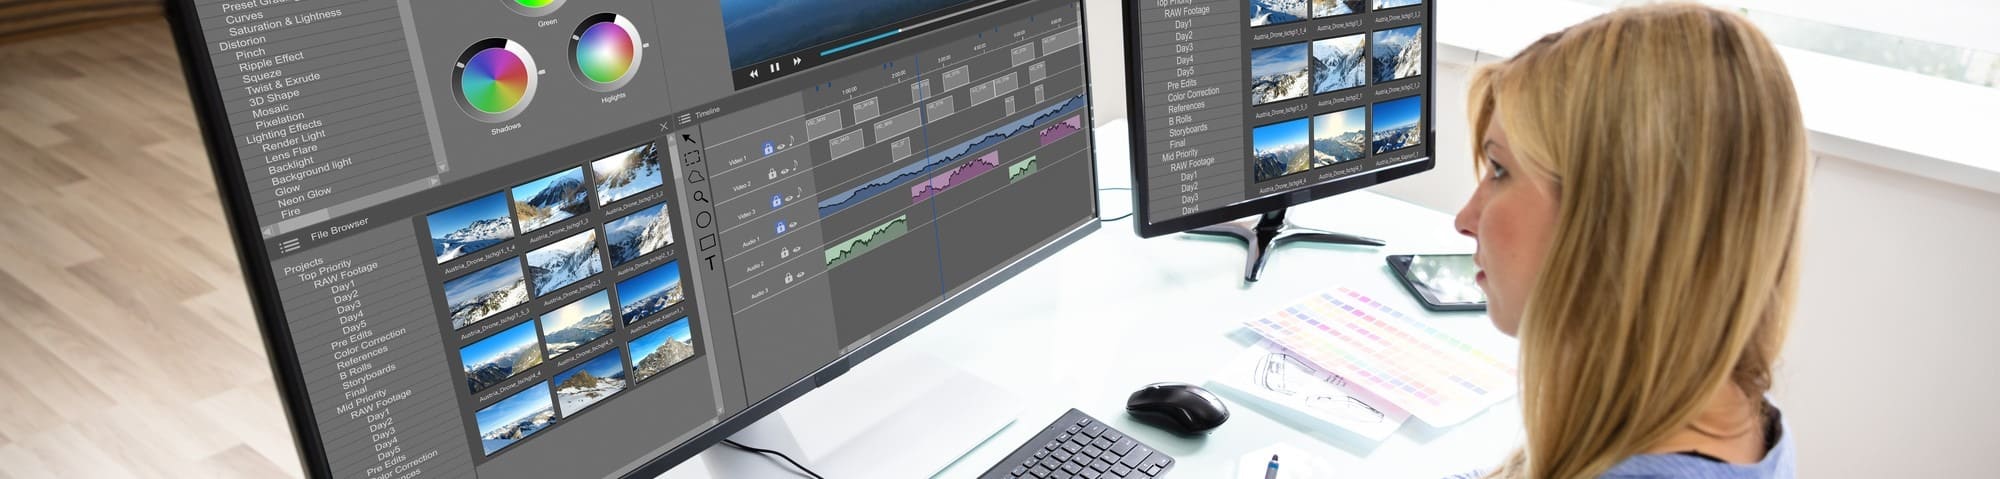 Best Video Editing Tips For Beginners